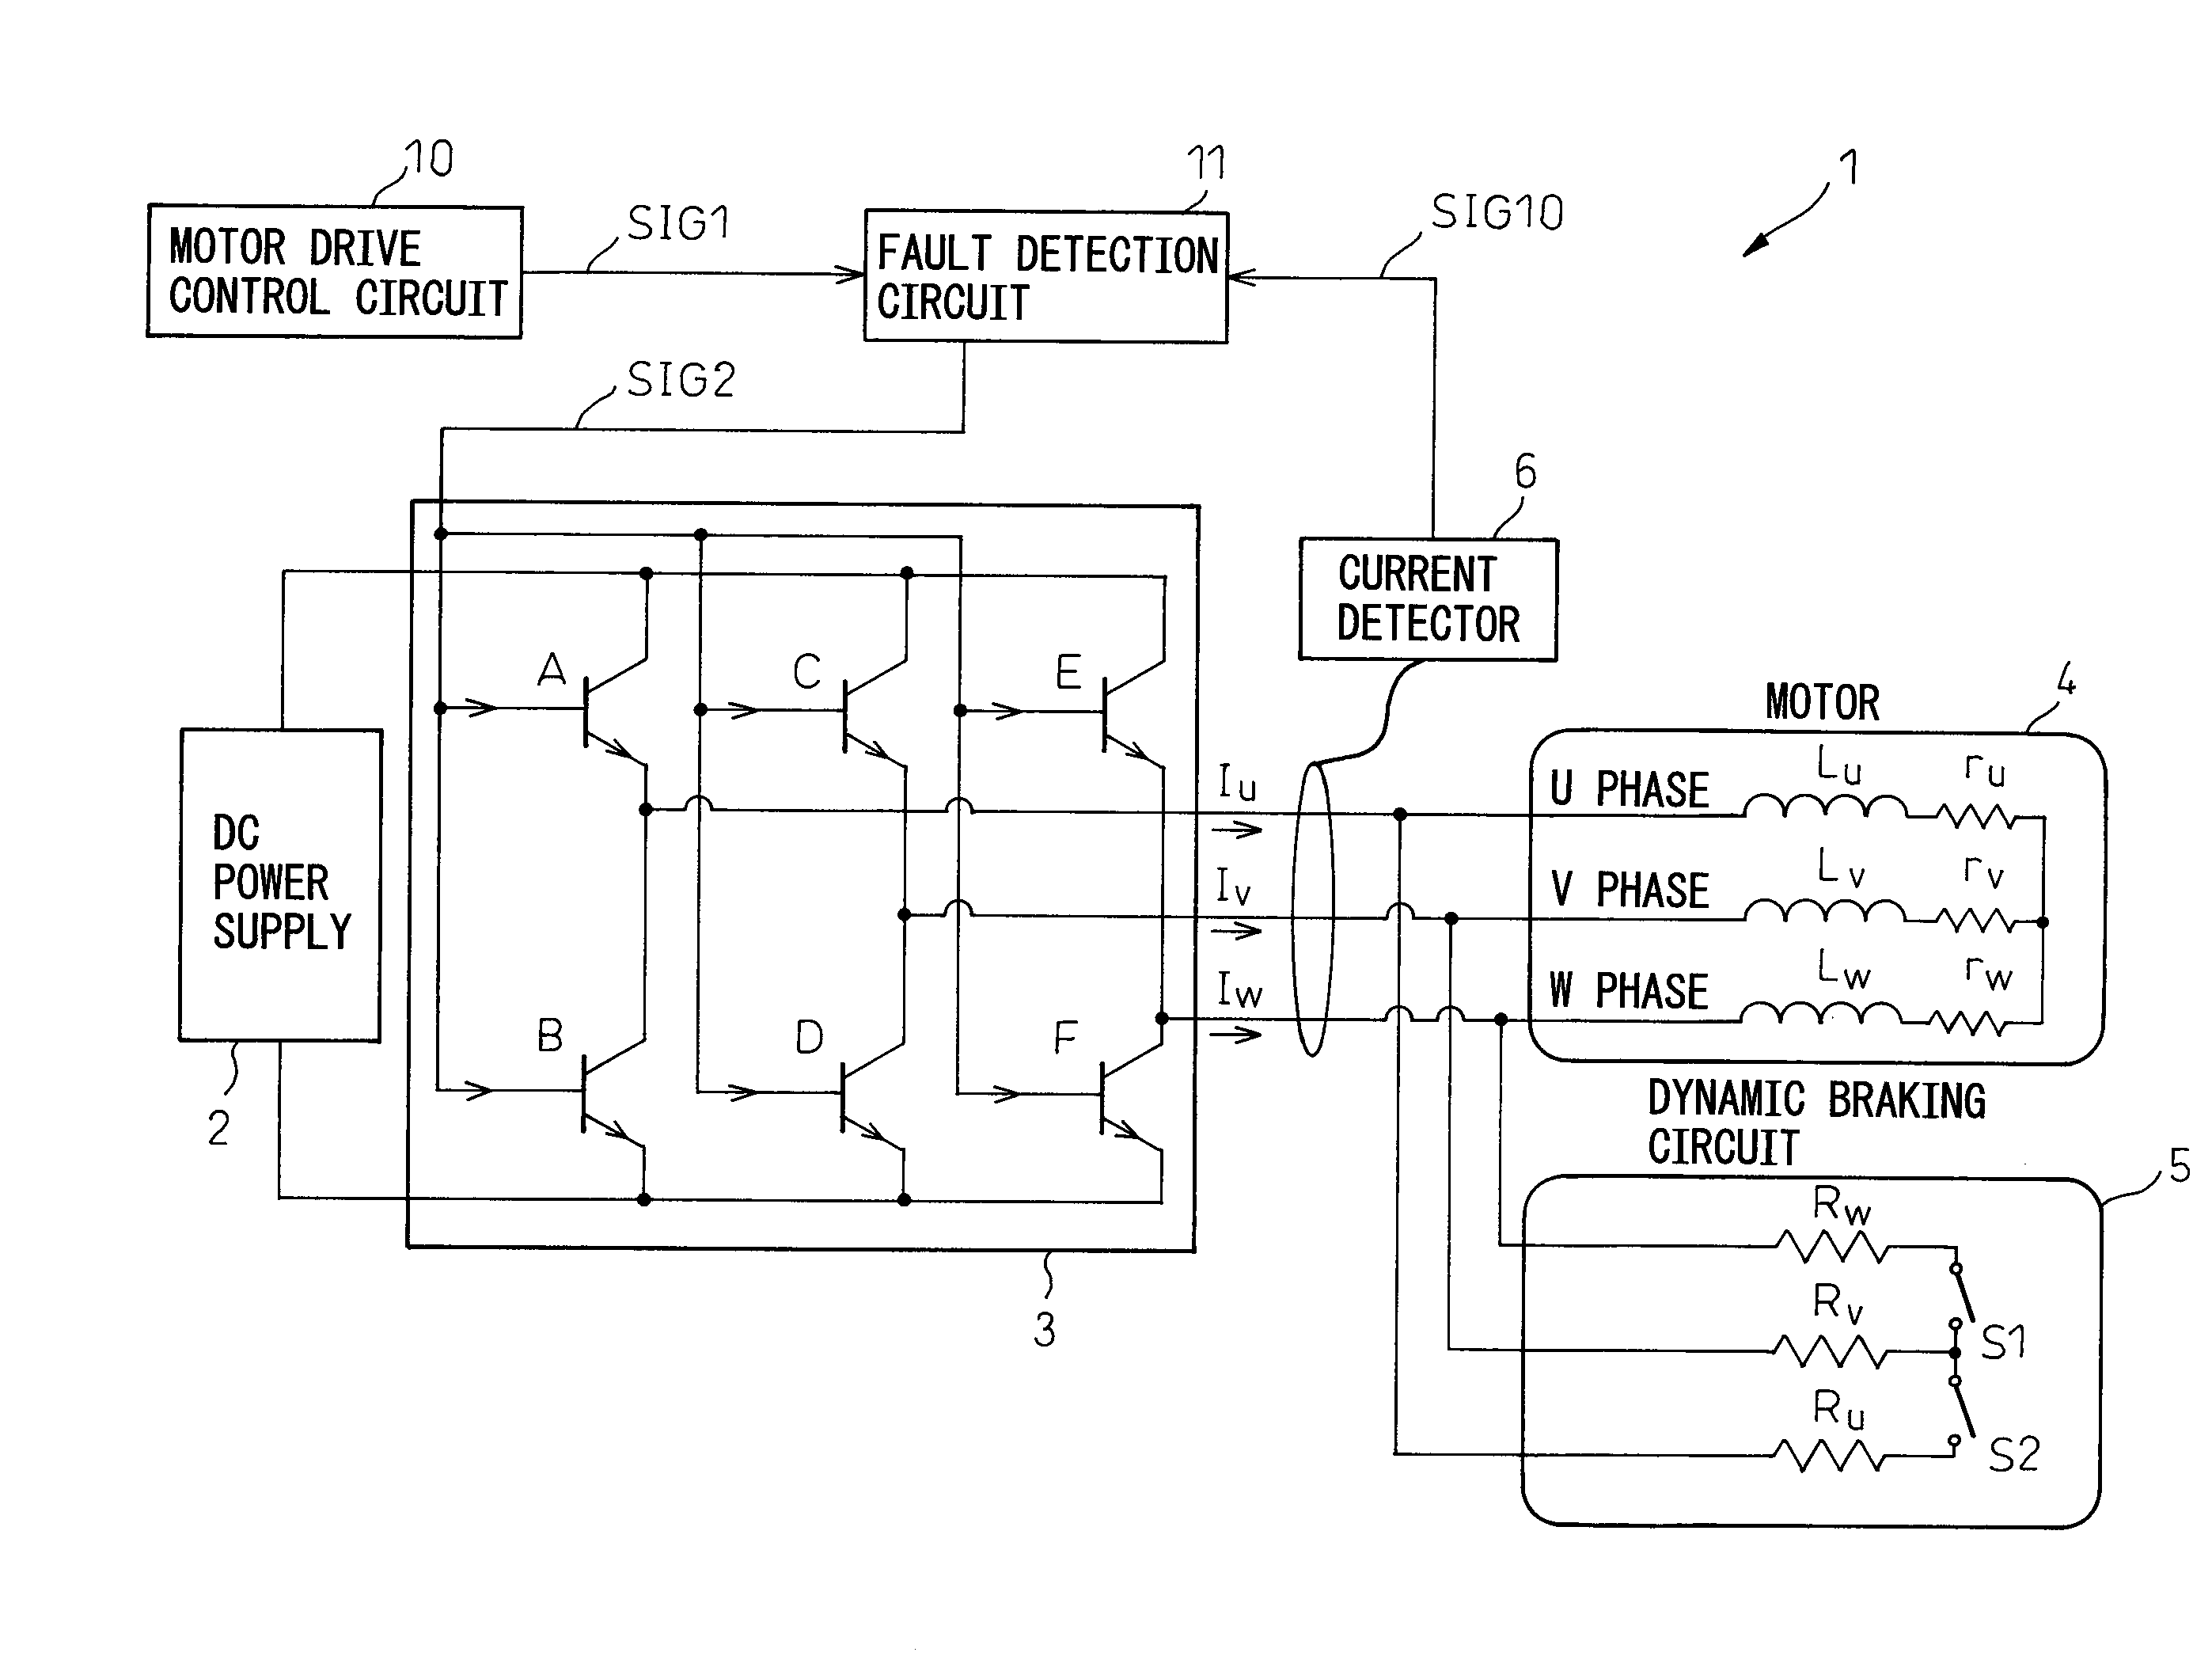 Motor drive apparatus equipped with dynamic braking circuit fault detection capability